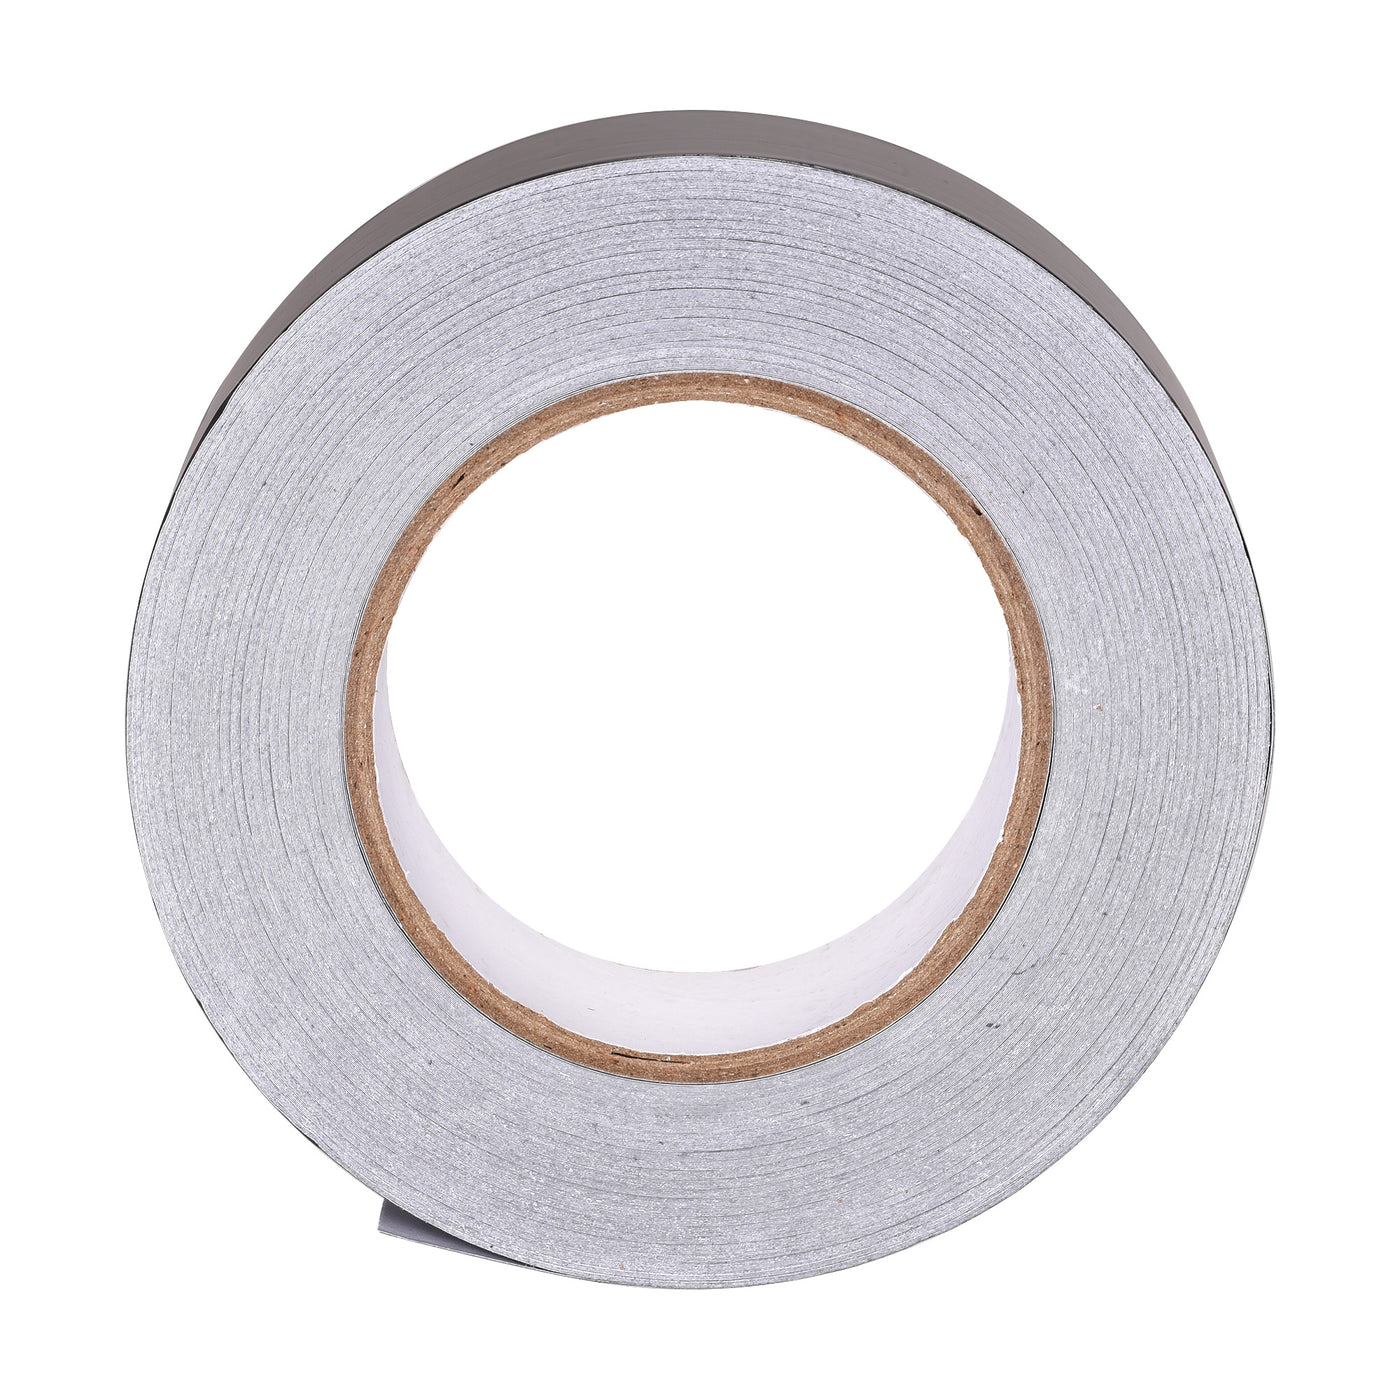 uxcell Uxcell 50mm Aluminum Foil Tape for HVAC, Patching Hot and Blocking light 50m/164ft